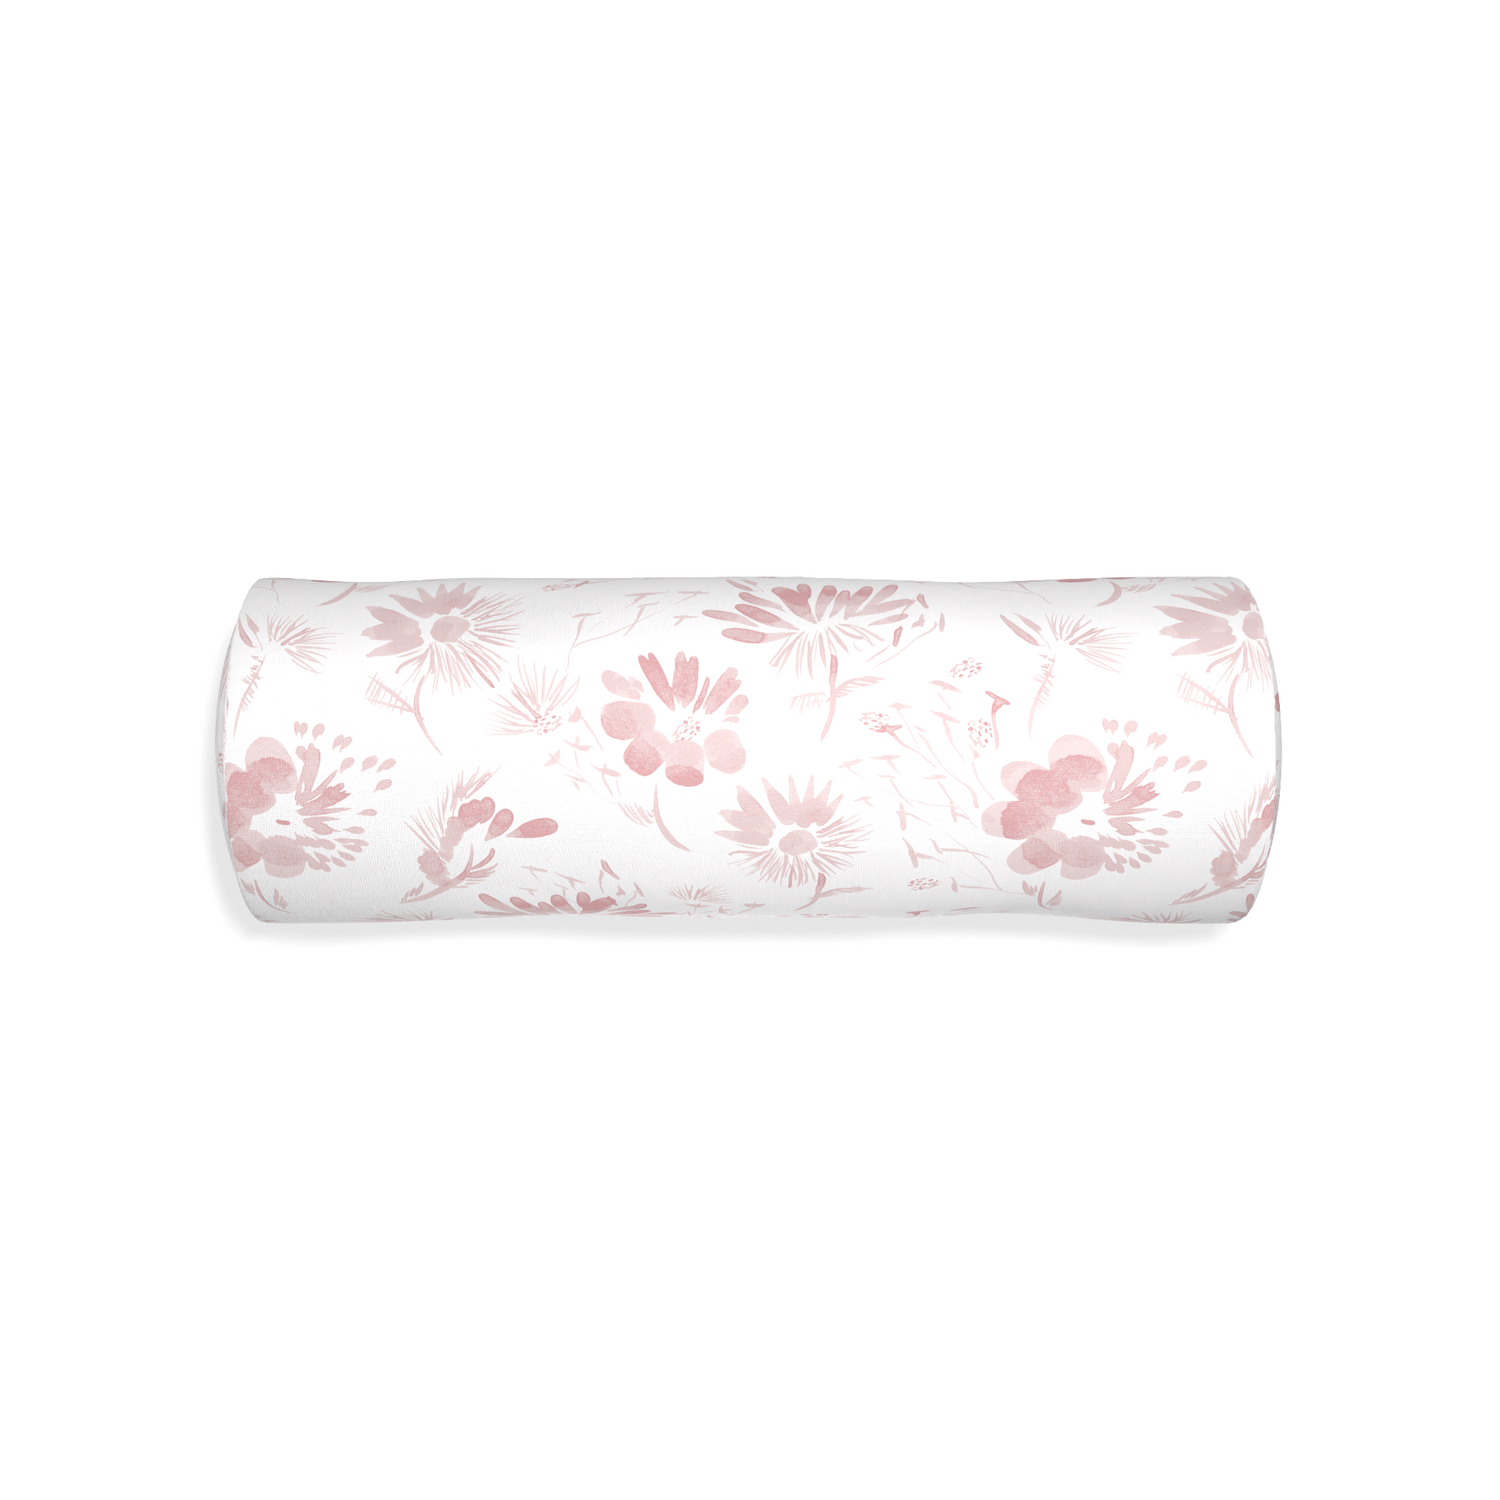 Bolster blake custom pink floralpillow with none on white background